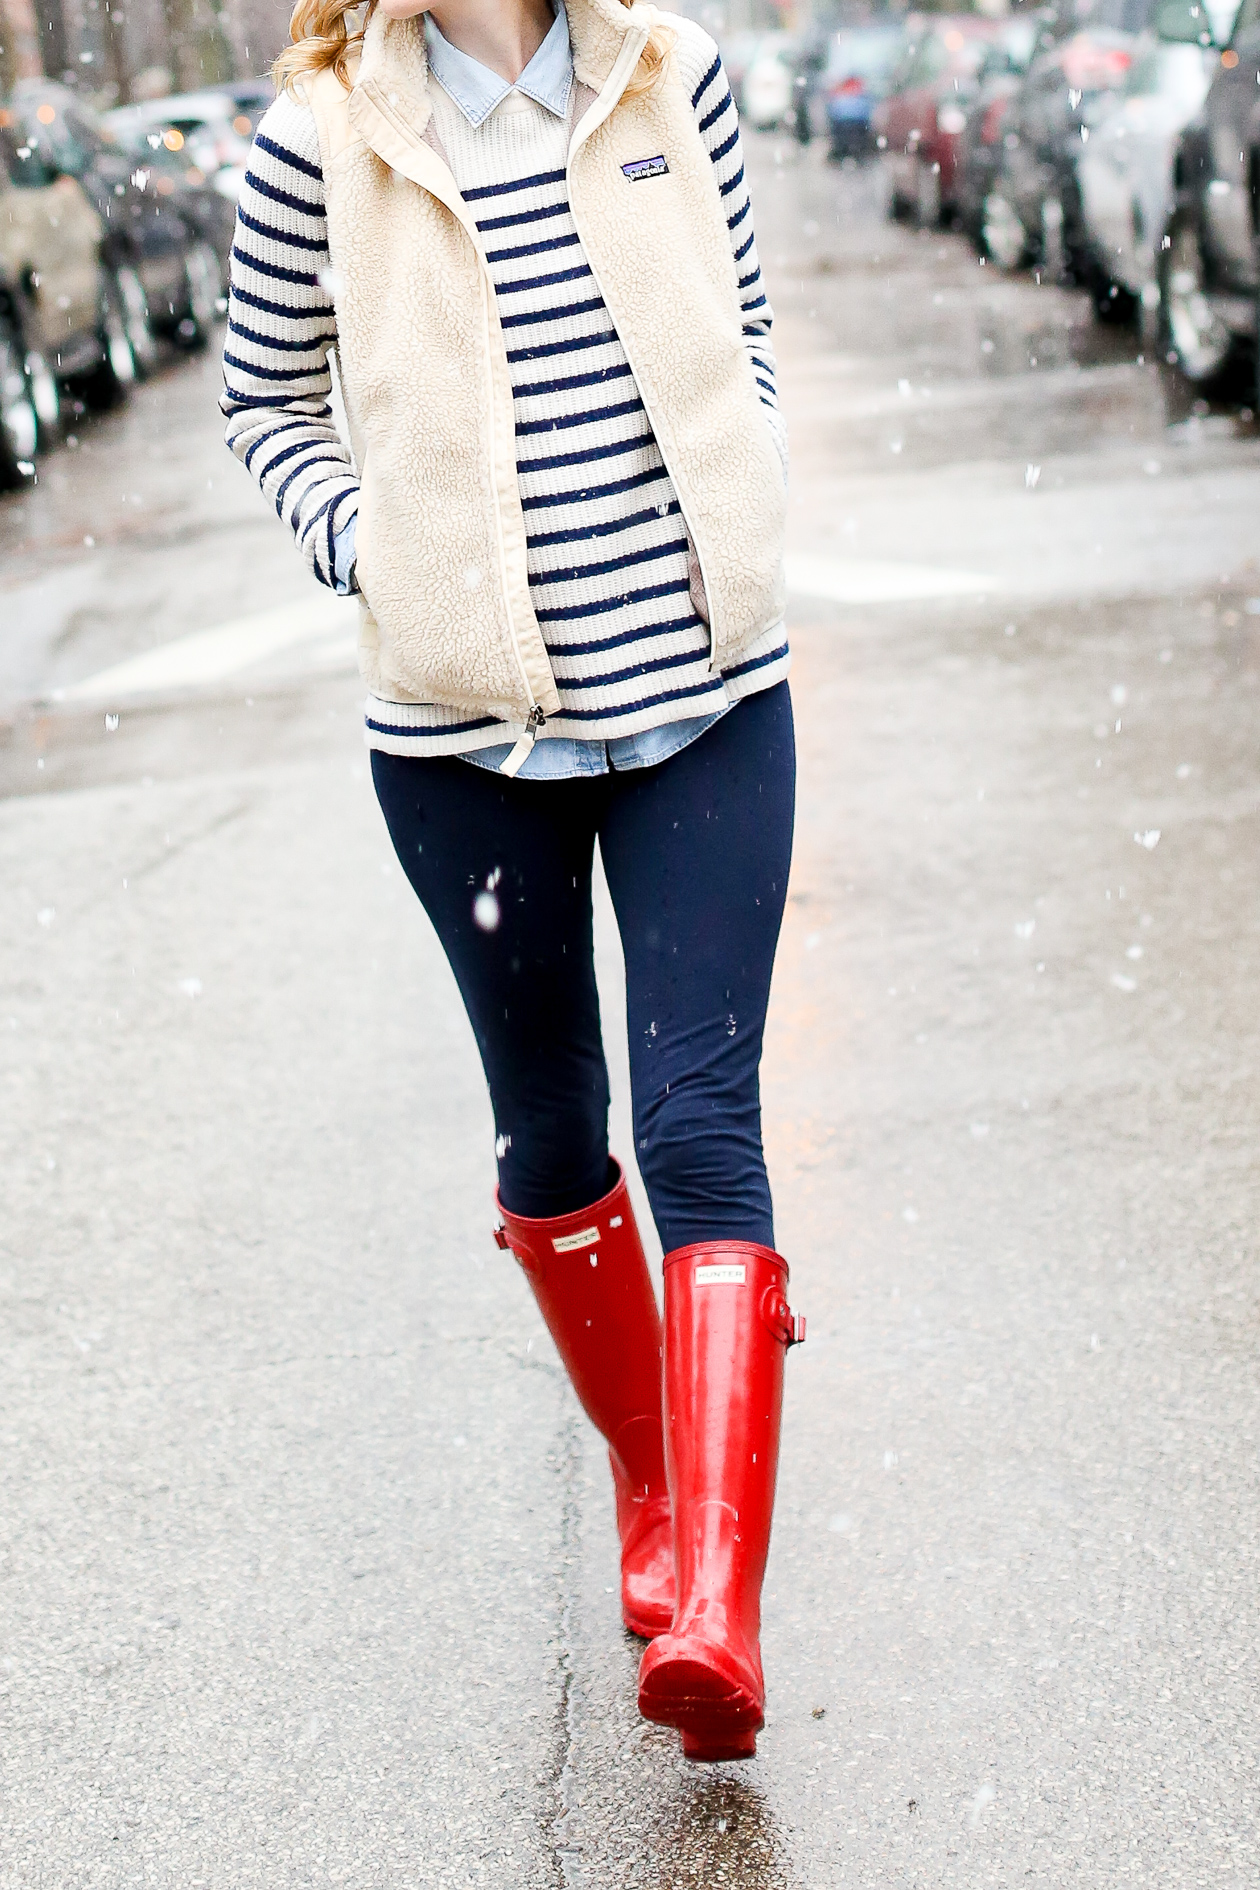 Hunter Boots Are The Next Big Thing